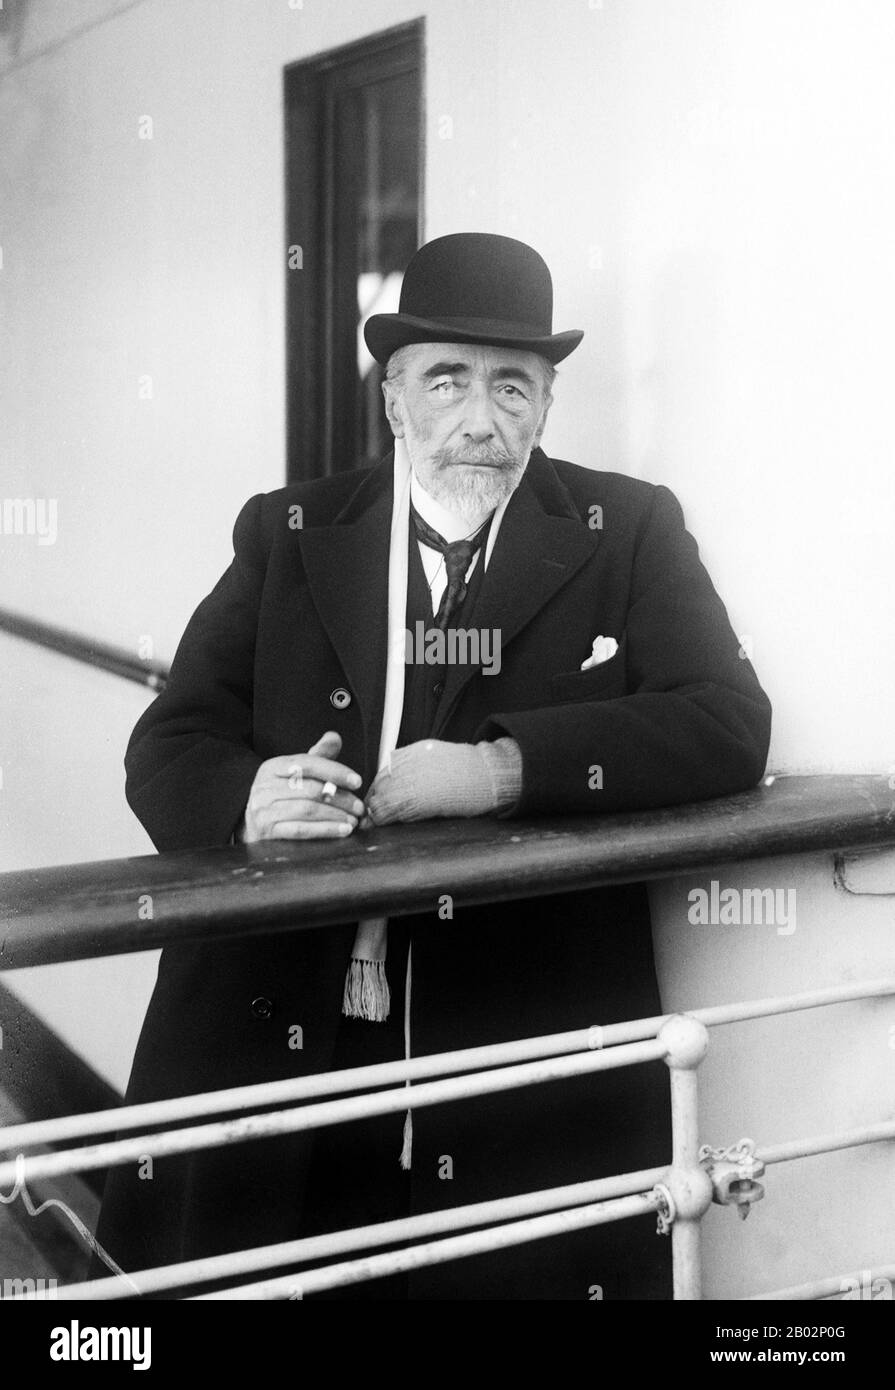 UK / Poland: Joseph Conrad, born Józef Teodor Konrad Korzeniowski (1857-1924) arriving in New York by ship, 1920. Joseph Conrad (born Józef Teodor Konrad Korzeniowski in Berdichev, Ukraine) was a Polish novelist who wrote in English, after settling in England. Conrad is regarded as one of the great novelists in English, although he did not speak the language fluently until he was in his twenties (and then always with a marked Polish accent). Stock Photo